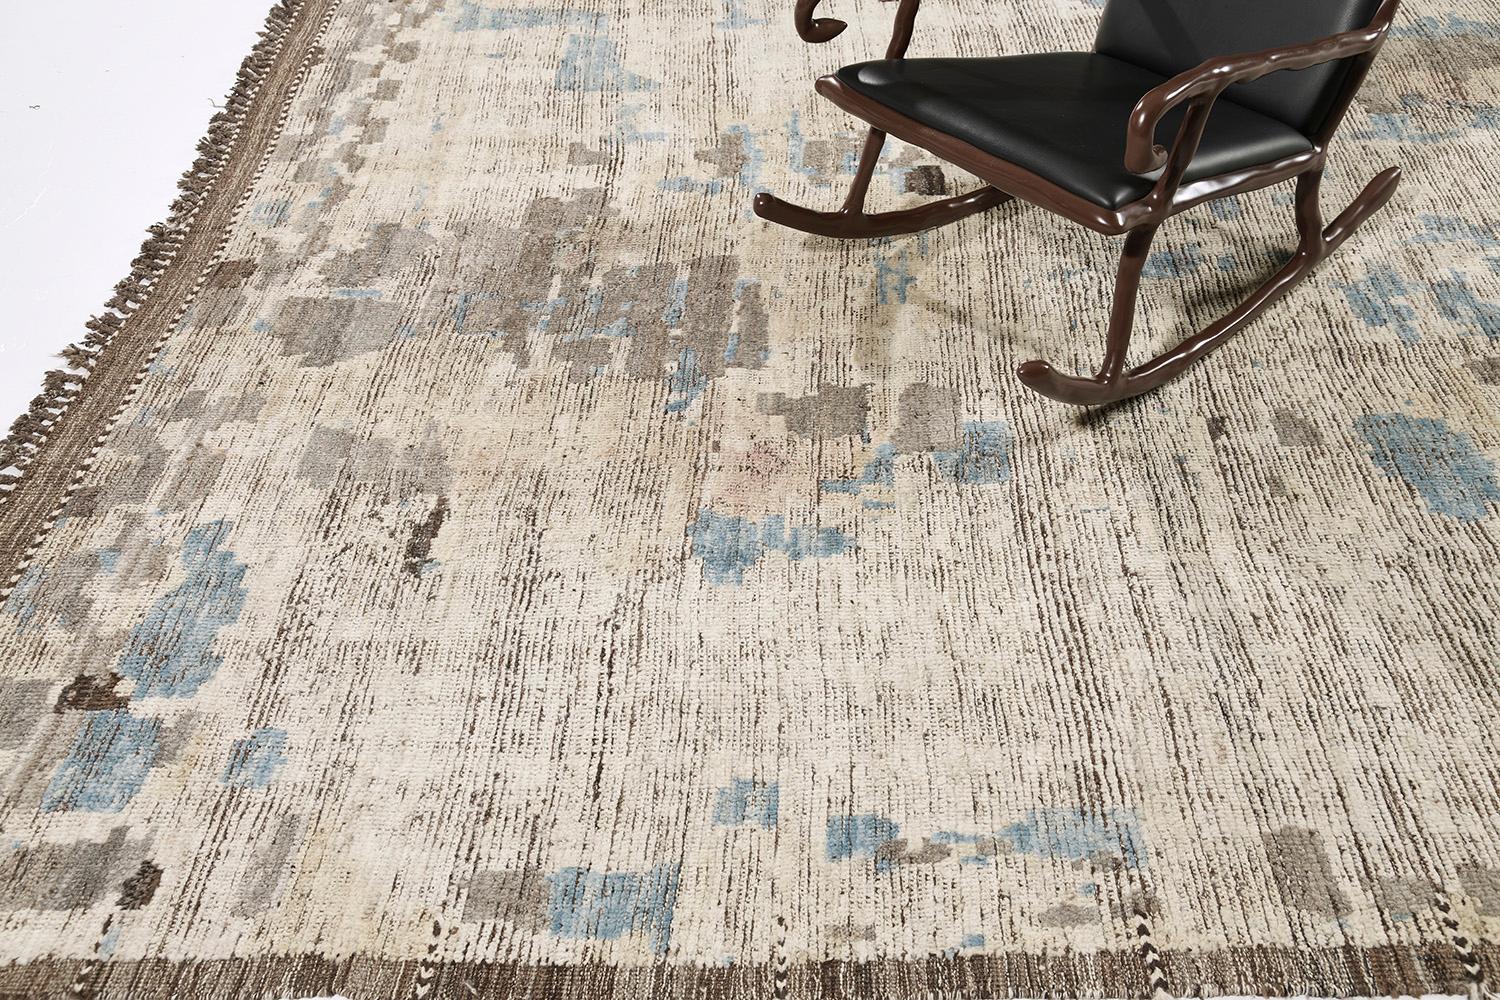 Zazate is made of luxurious wool and is made of timeless design elements. Its weaving of natural earth tones and unique design elements is what makes the Atlas Collection so unique and sought after. Mehraban's Atlas collection is noted for its